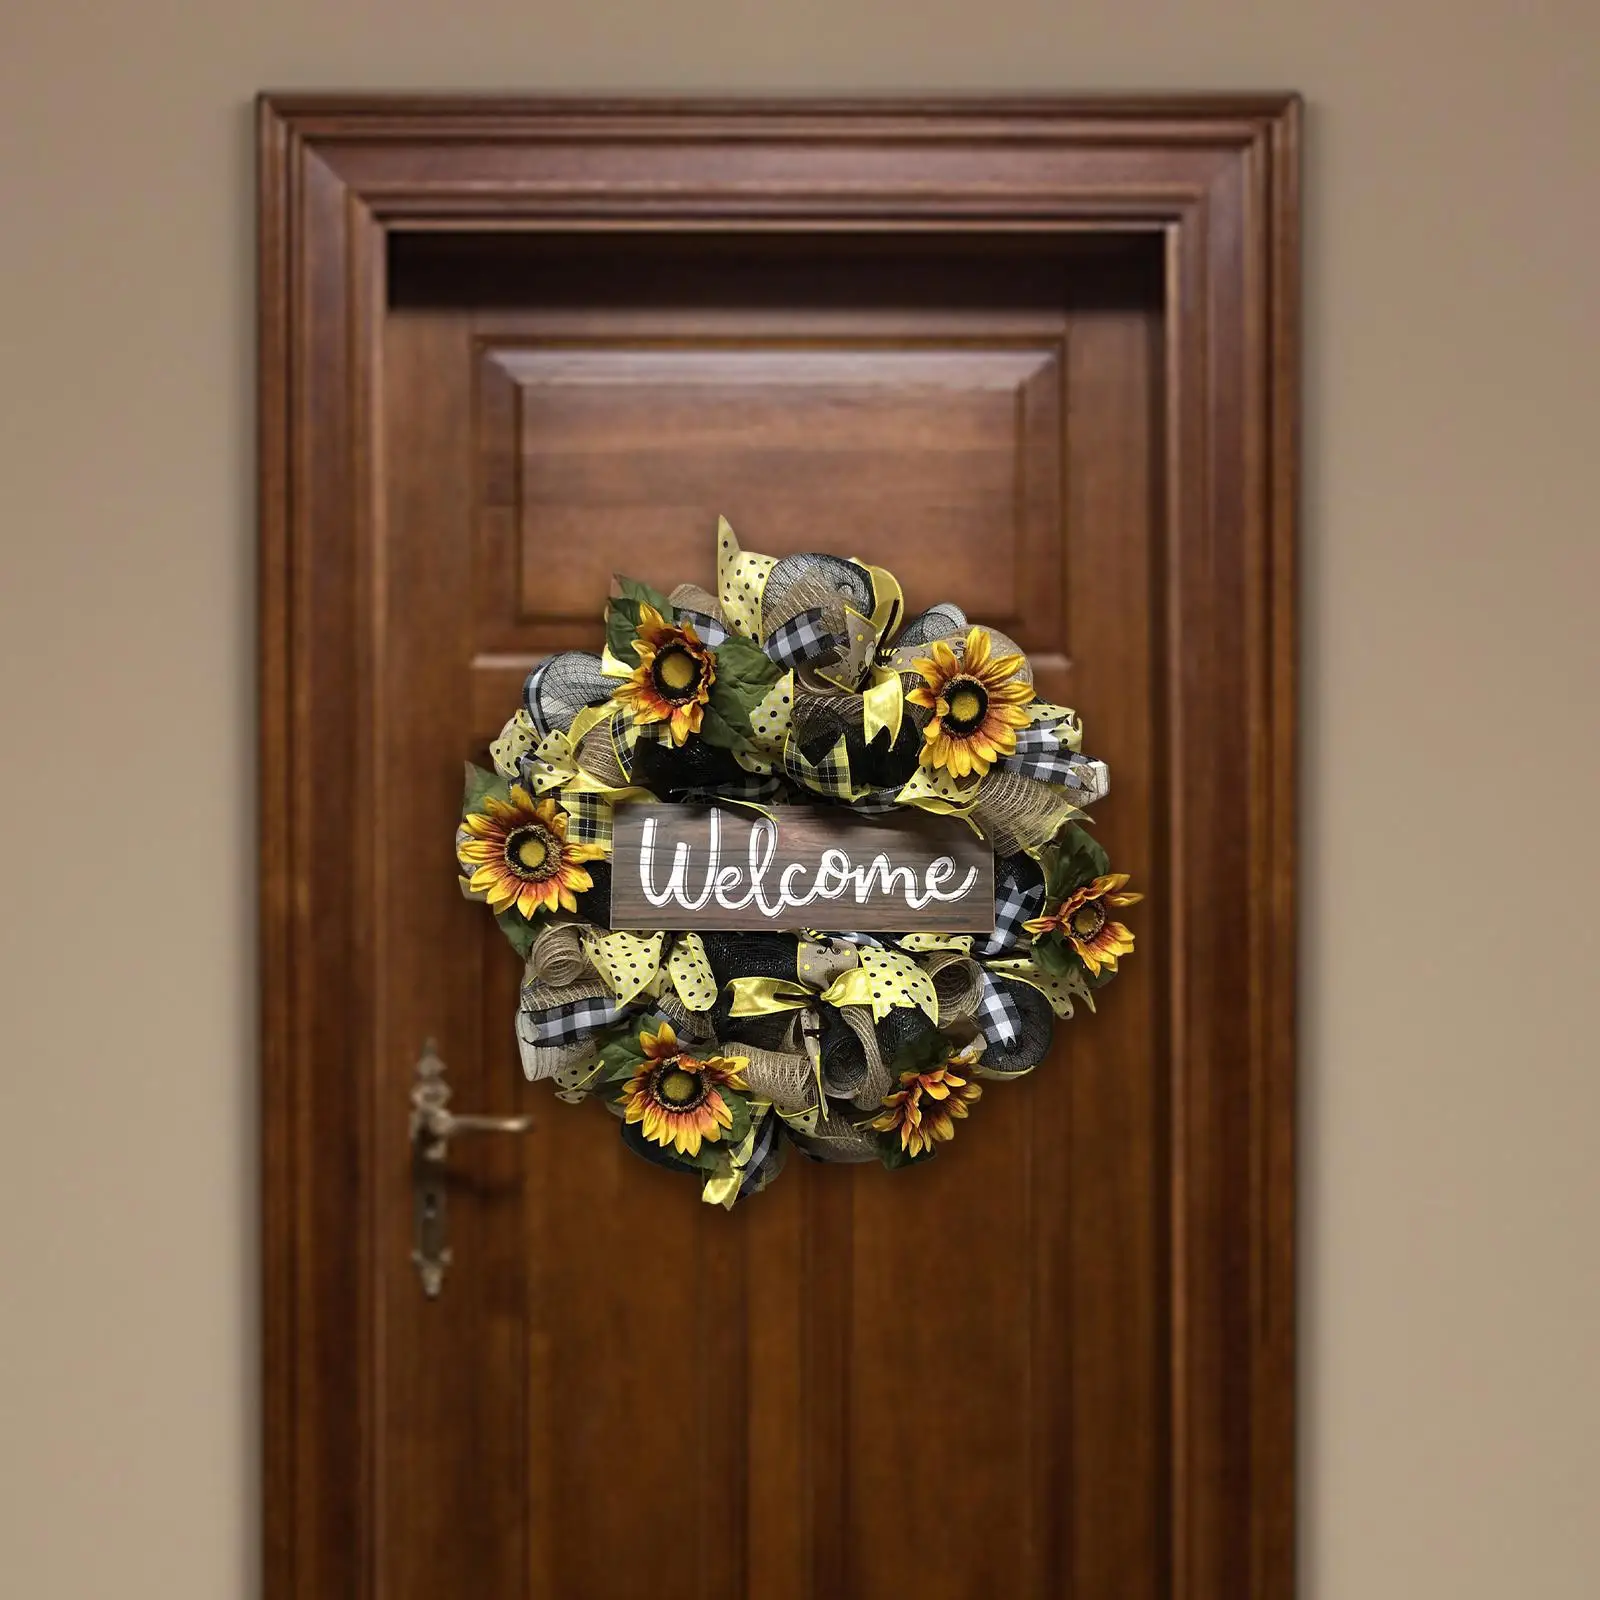 Realistic Artificial Sunflowers Wreath Welcome Sign for Festival Celebration Decoration